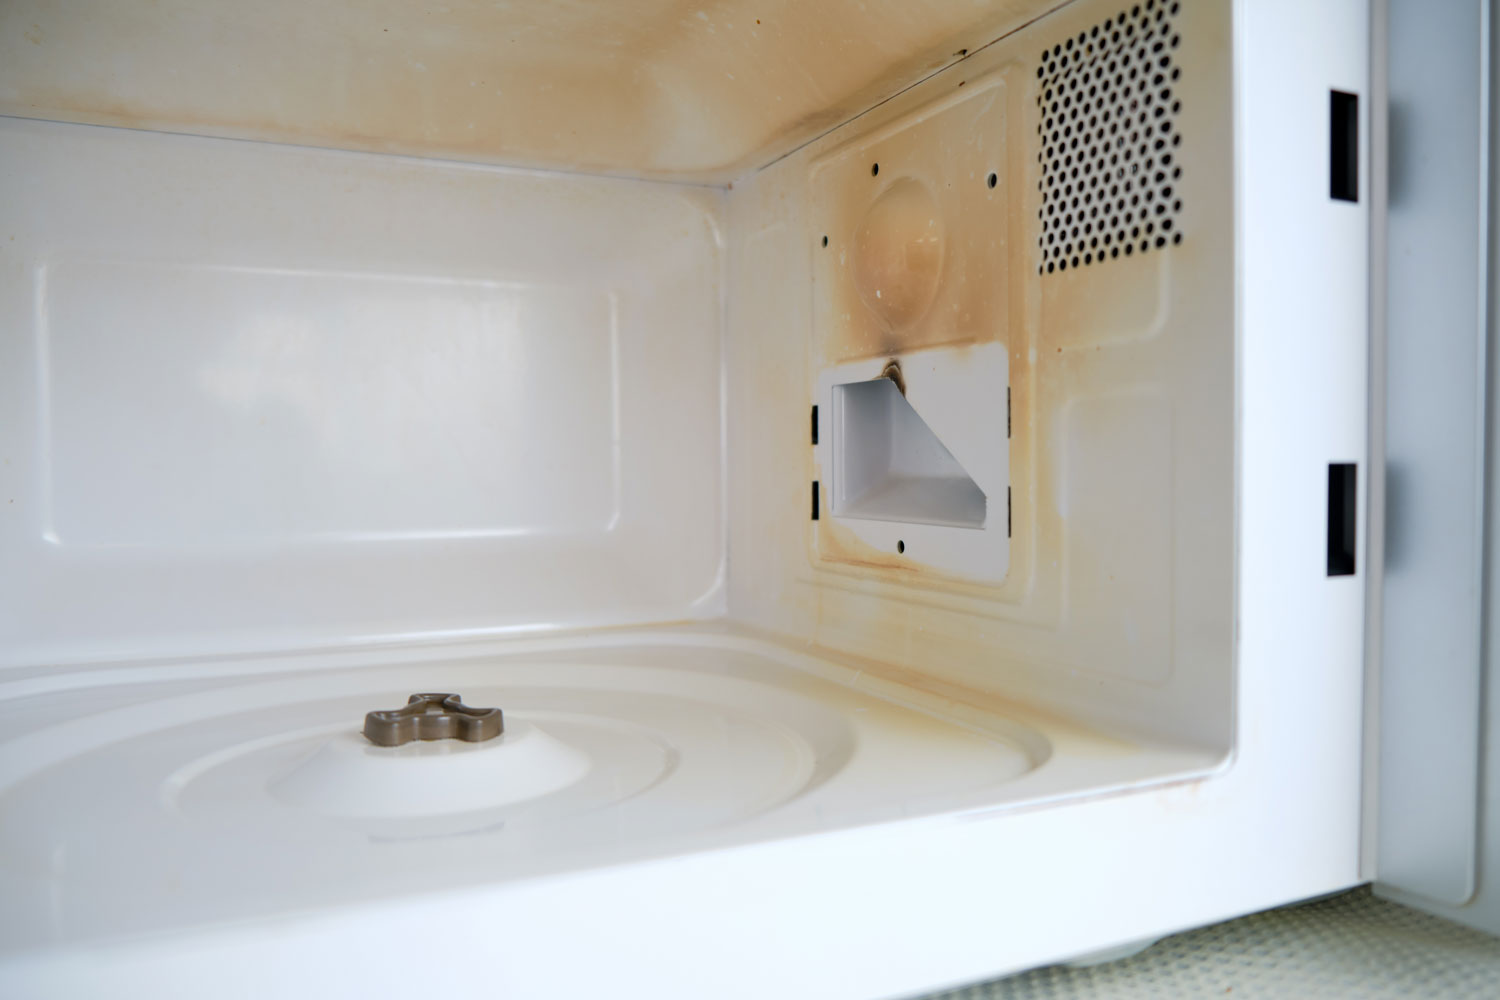 Repair of a sparkling microwave by replacing the mica plate. Broken microwave with self replacement burnt mica sheet
